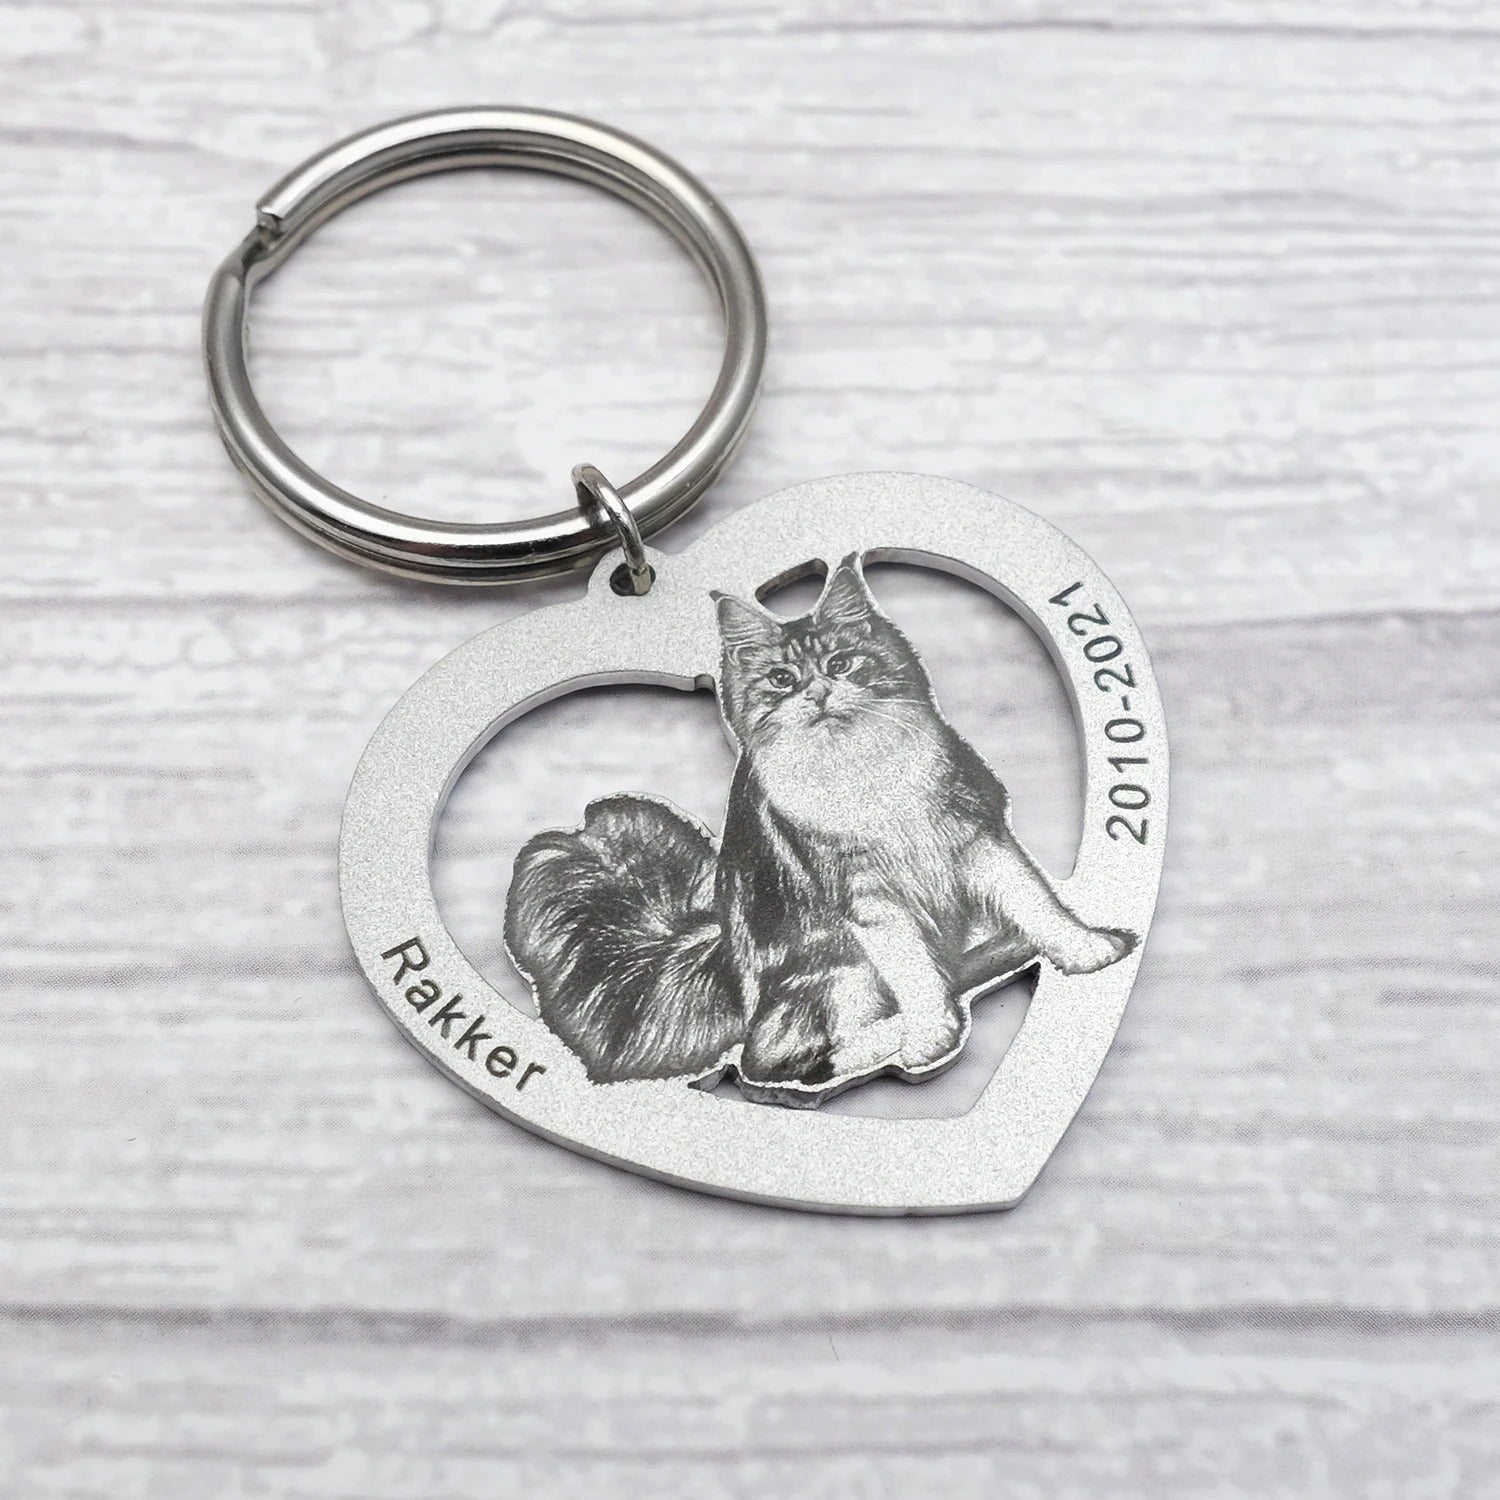 PAWsonalized Pet memorial jewelry by Style's Bug - Style's Bug Heart Keychain (Name + Date)